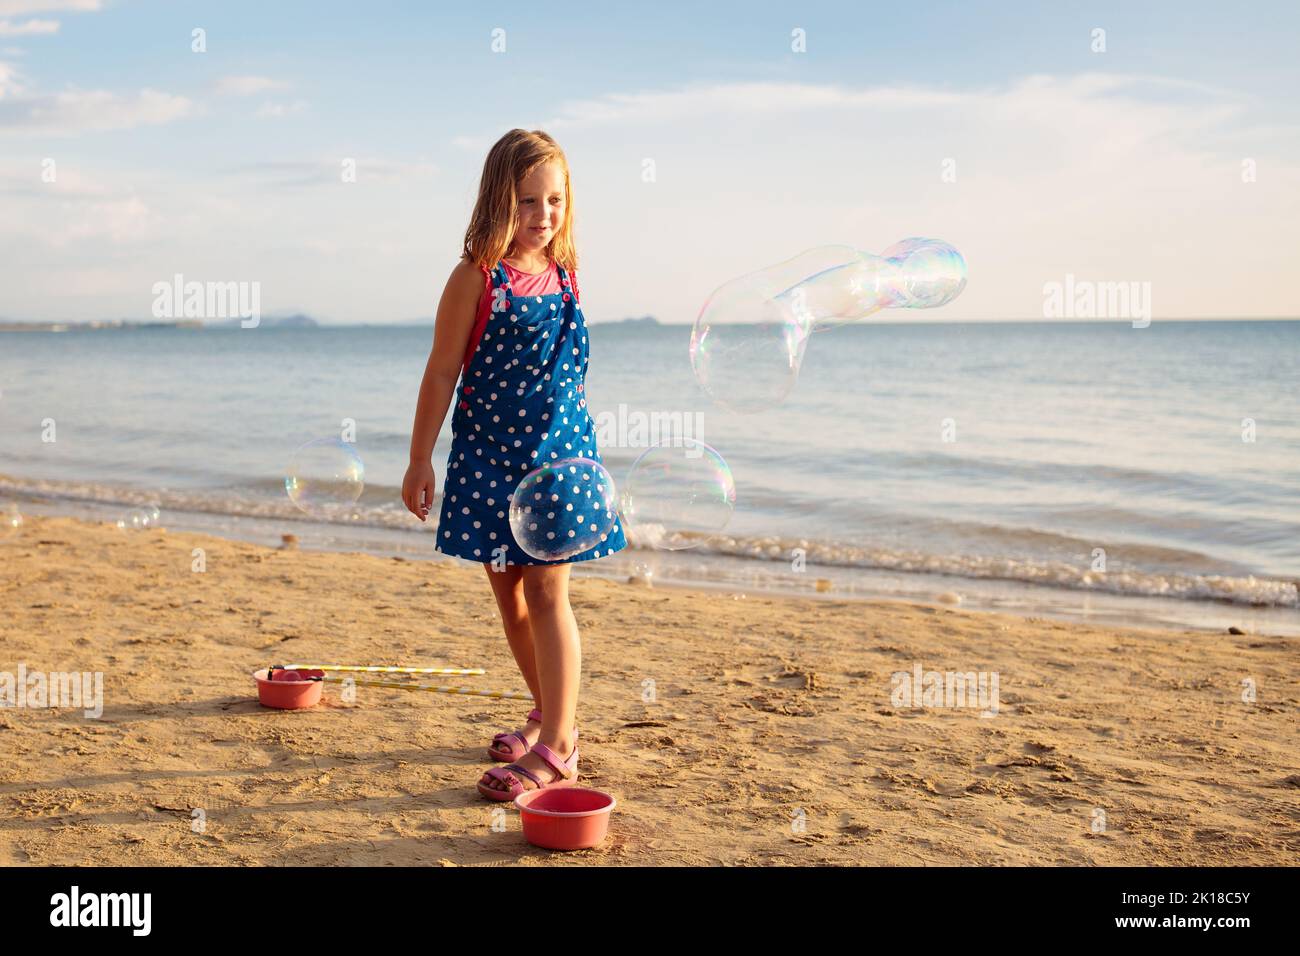 Kids blow bubbles at tropical beach. Child blowing soap bubble playing at sea. Family summer vacation with young kid. Outdoor beach activity for child Stock Photo